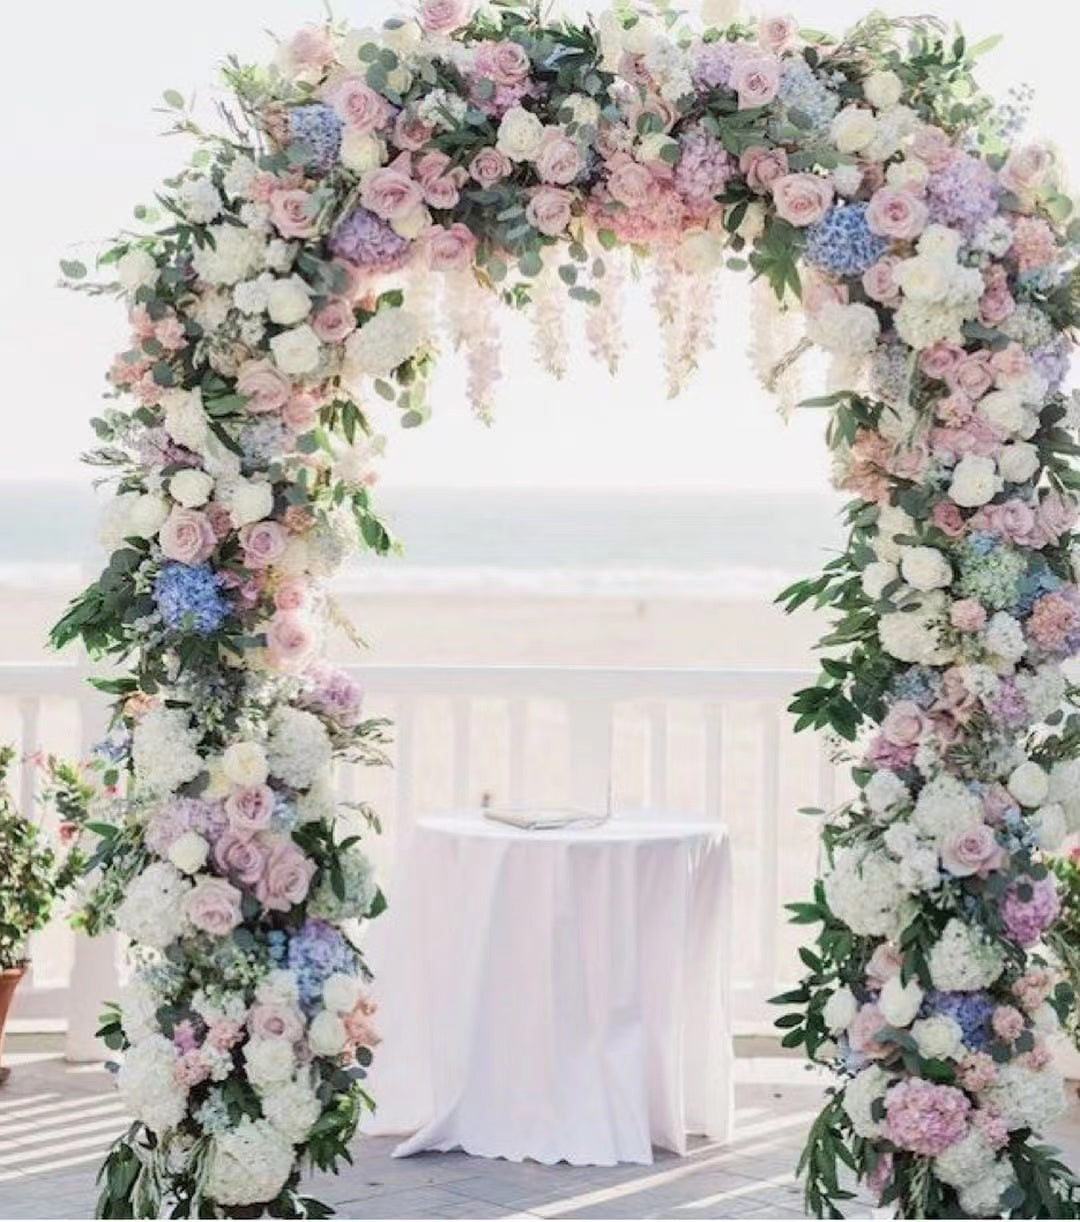 Hana：2023 New Wedding Party Background Floral Arch Decoration include Framet Rose Morning